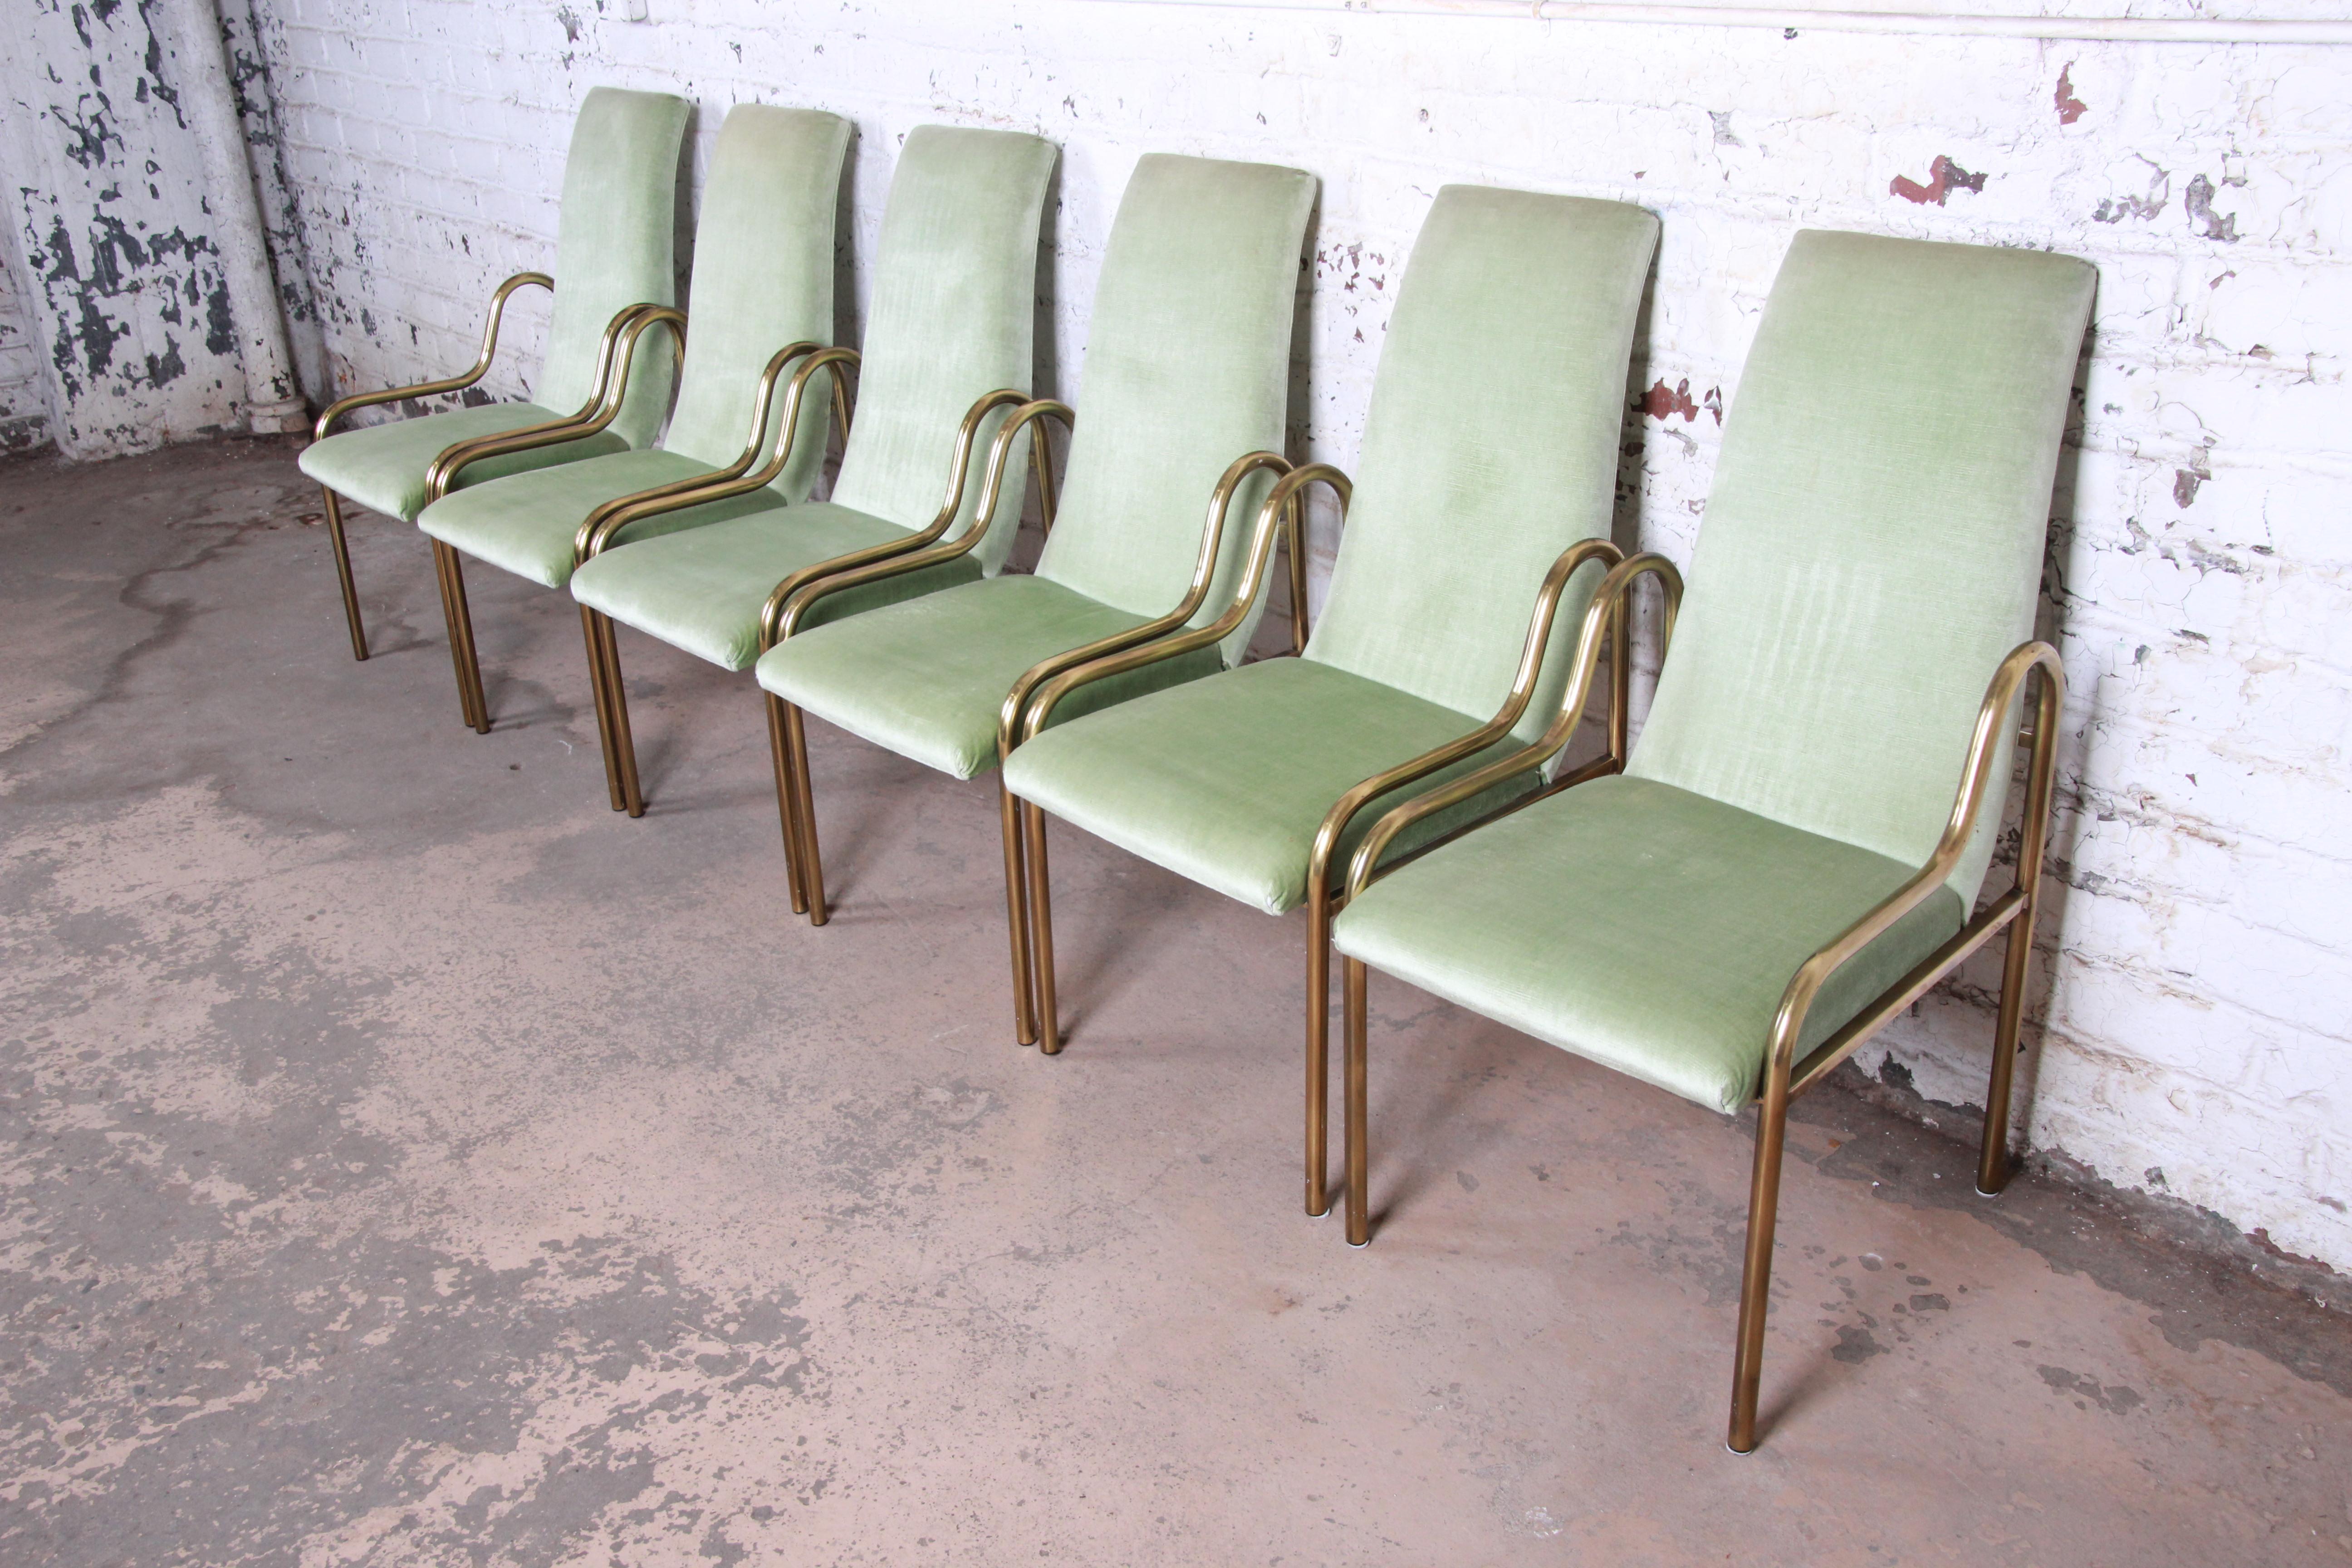 An exceptional set of six midcentury Hollywood Regency dining chairs by Mastercraft. The chairs feature sculpted brass frames with original sage green velvet upholstery. They are in very good original vintage condition.

Each chair measures